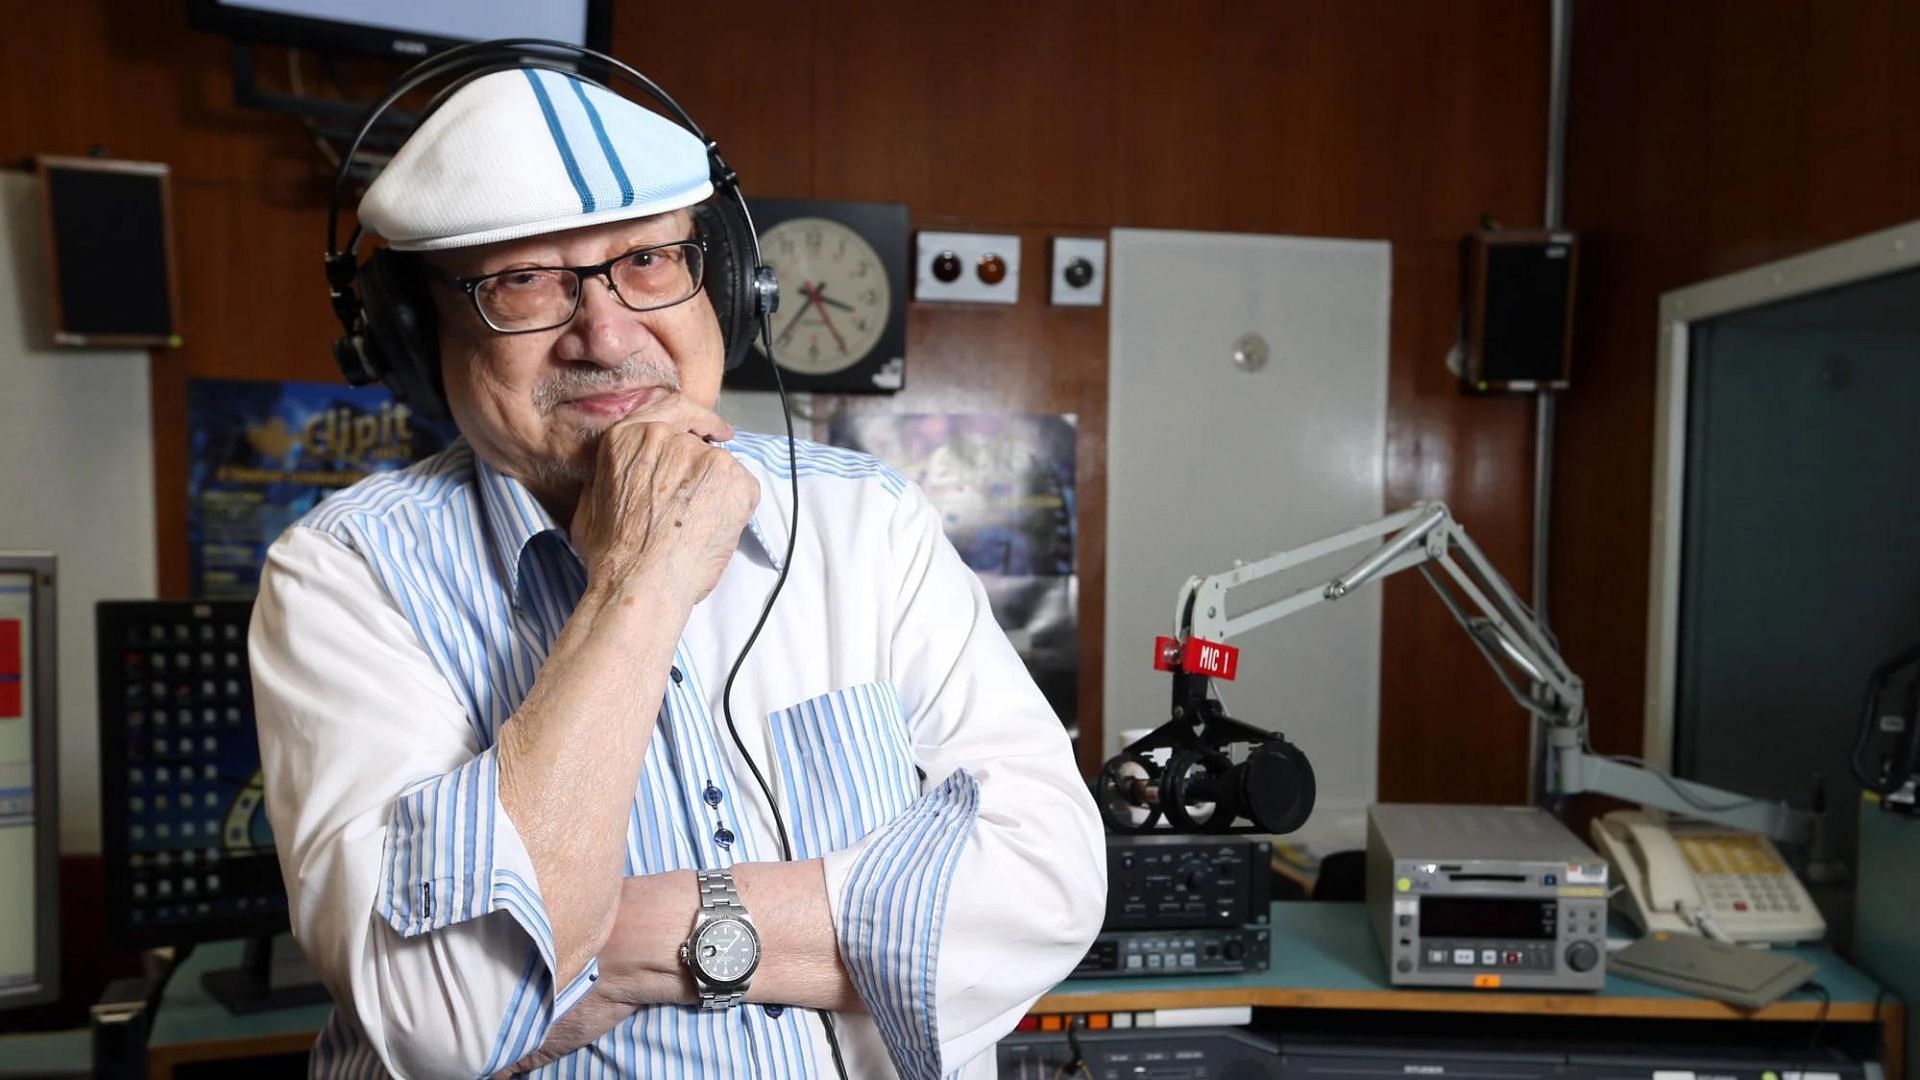 Raymond &quot;Uncle Ray&quot; Cordeiro was awarded a lifetime achievement award by RTHK in 1997 (Image via K.Y. Cheng/SCMP).